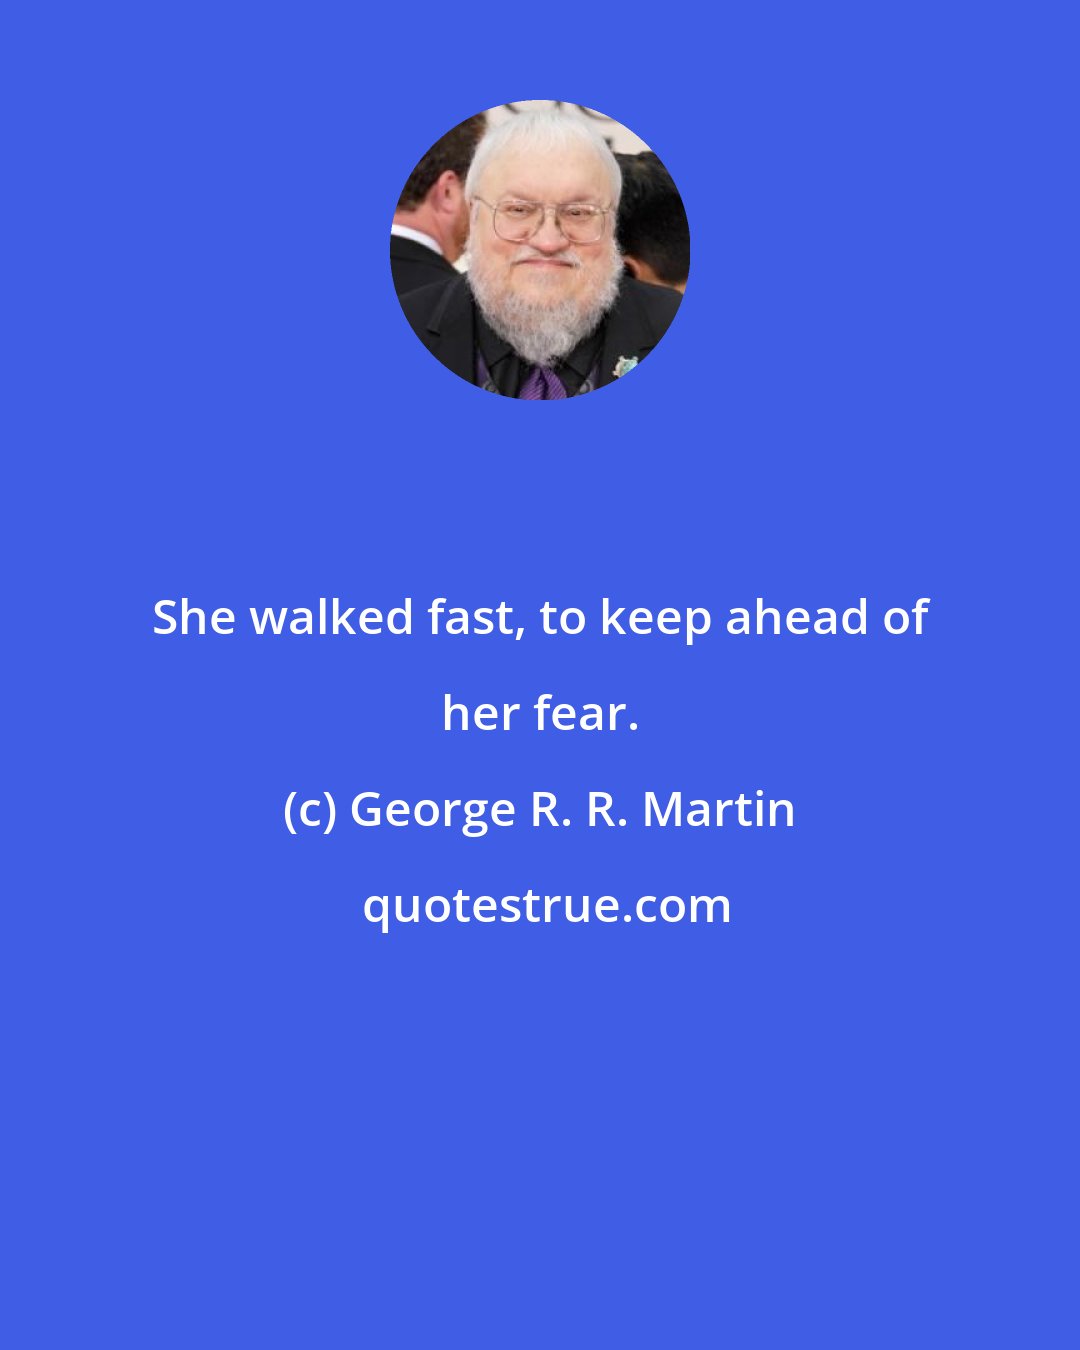 George R. R. Martin: She walked fast, to keep ahead of her fear.